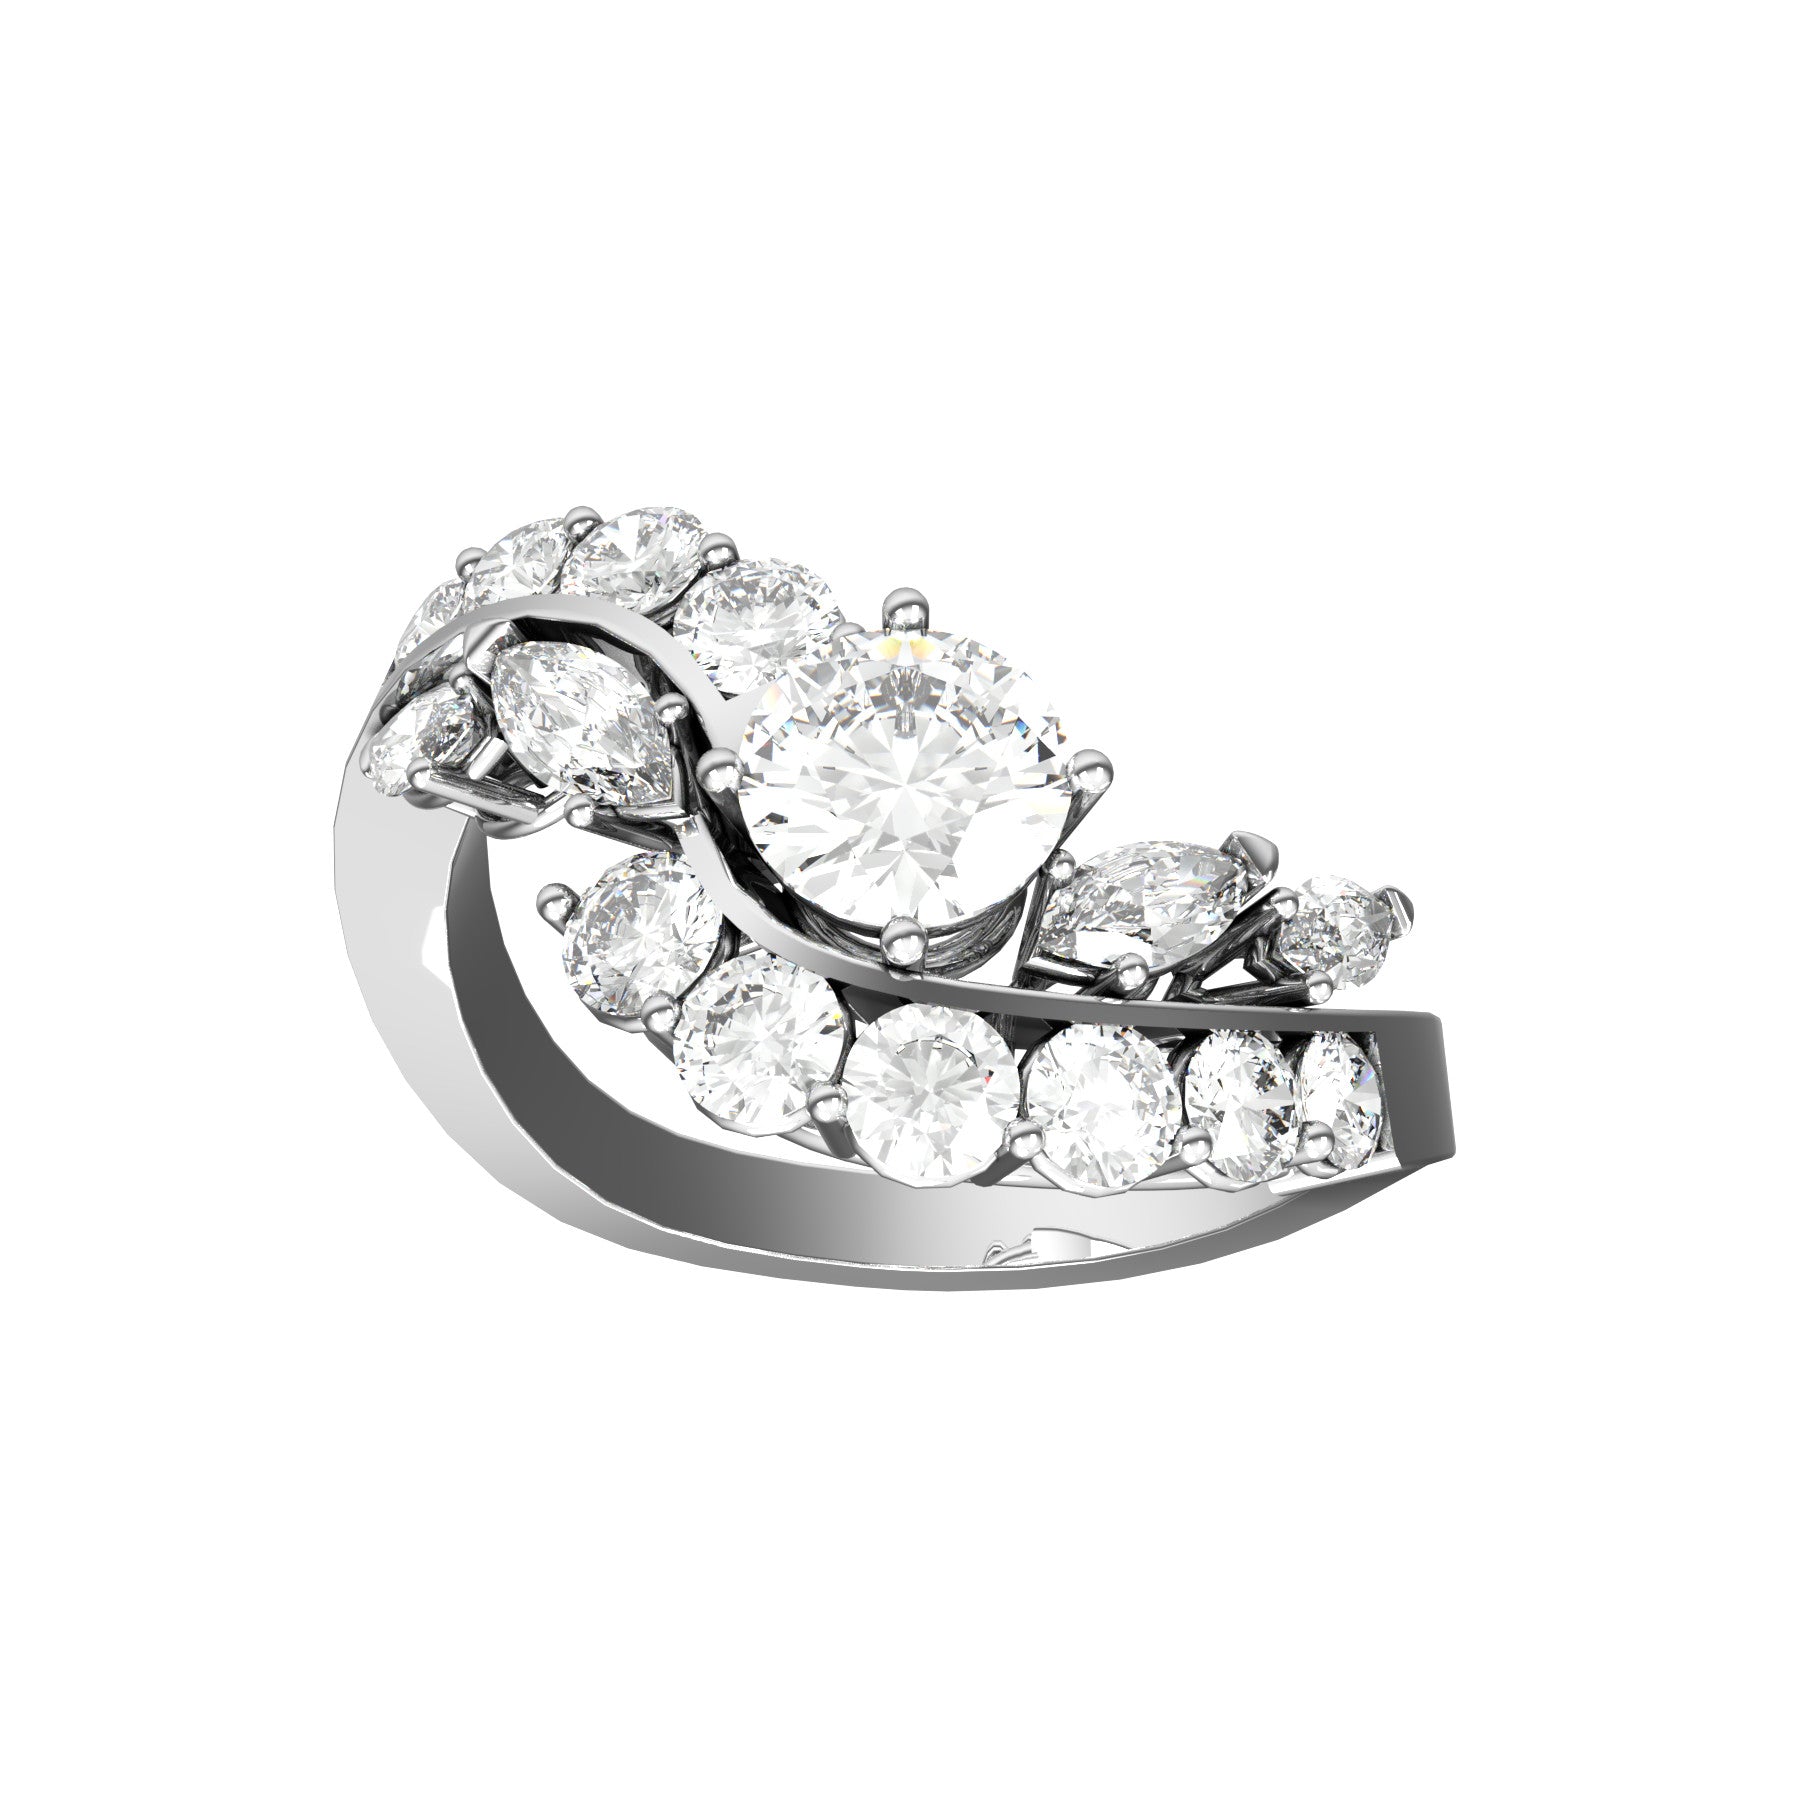 diamond ring, 0,59 natural round diamond, 11 natural round diamonds, 4 natural navette diamonds, 18 K white gold, weight about 3,6  g. (0.13 oz), width 13,3 mm max